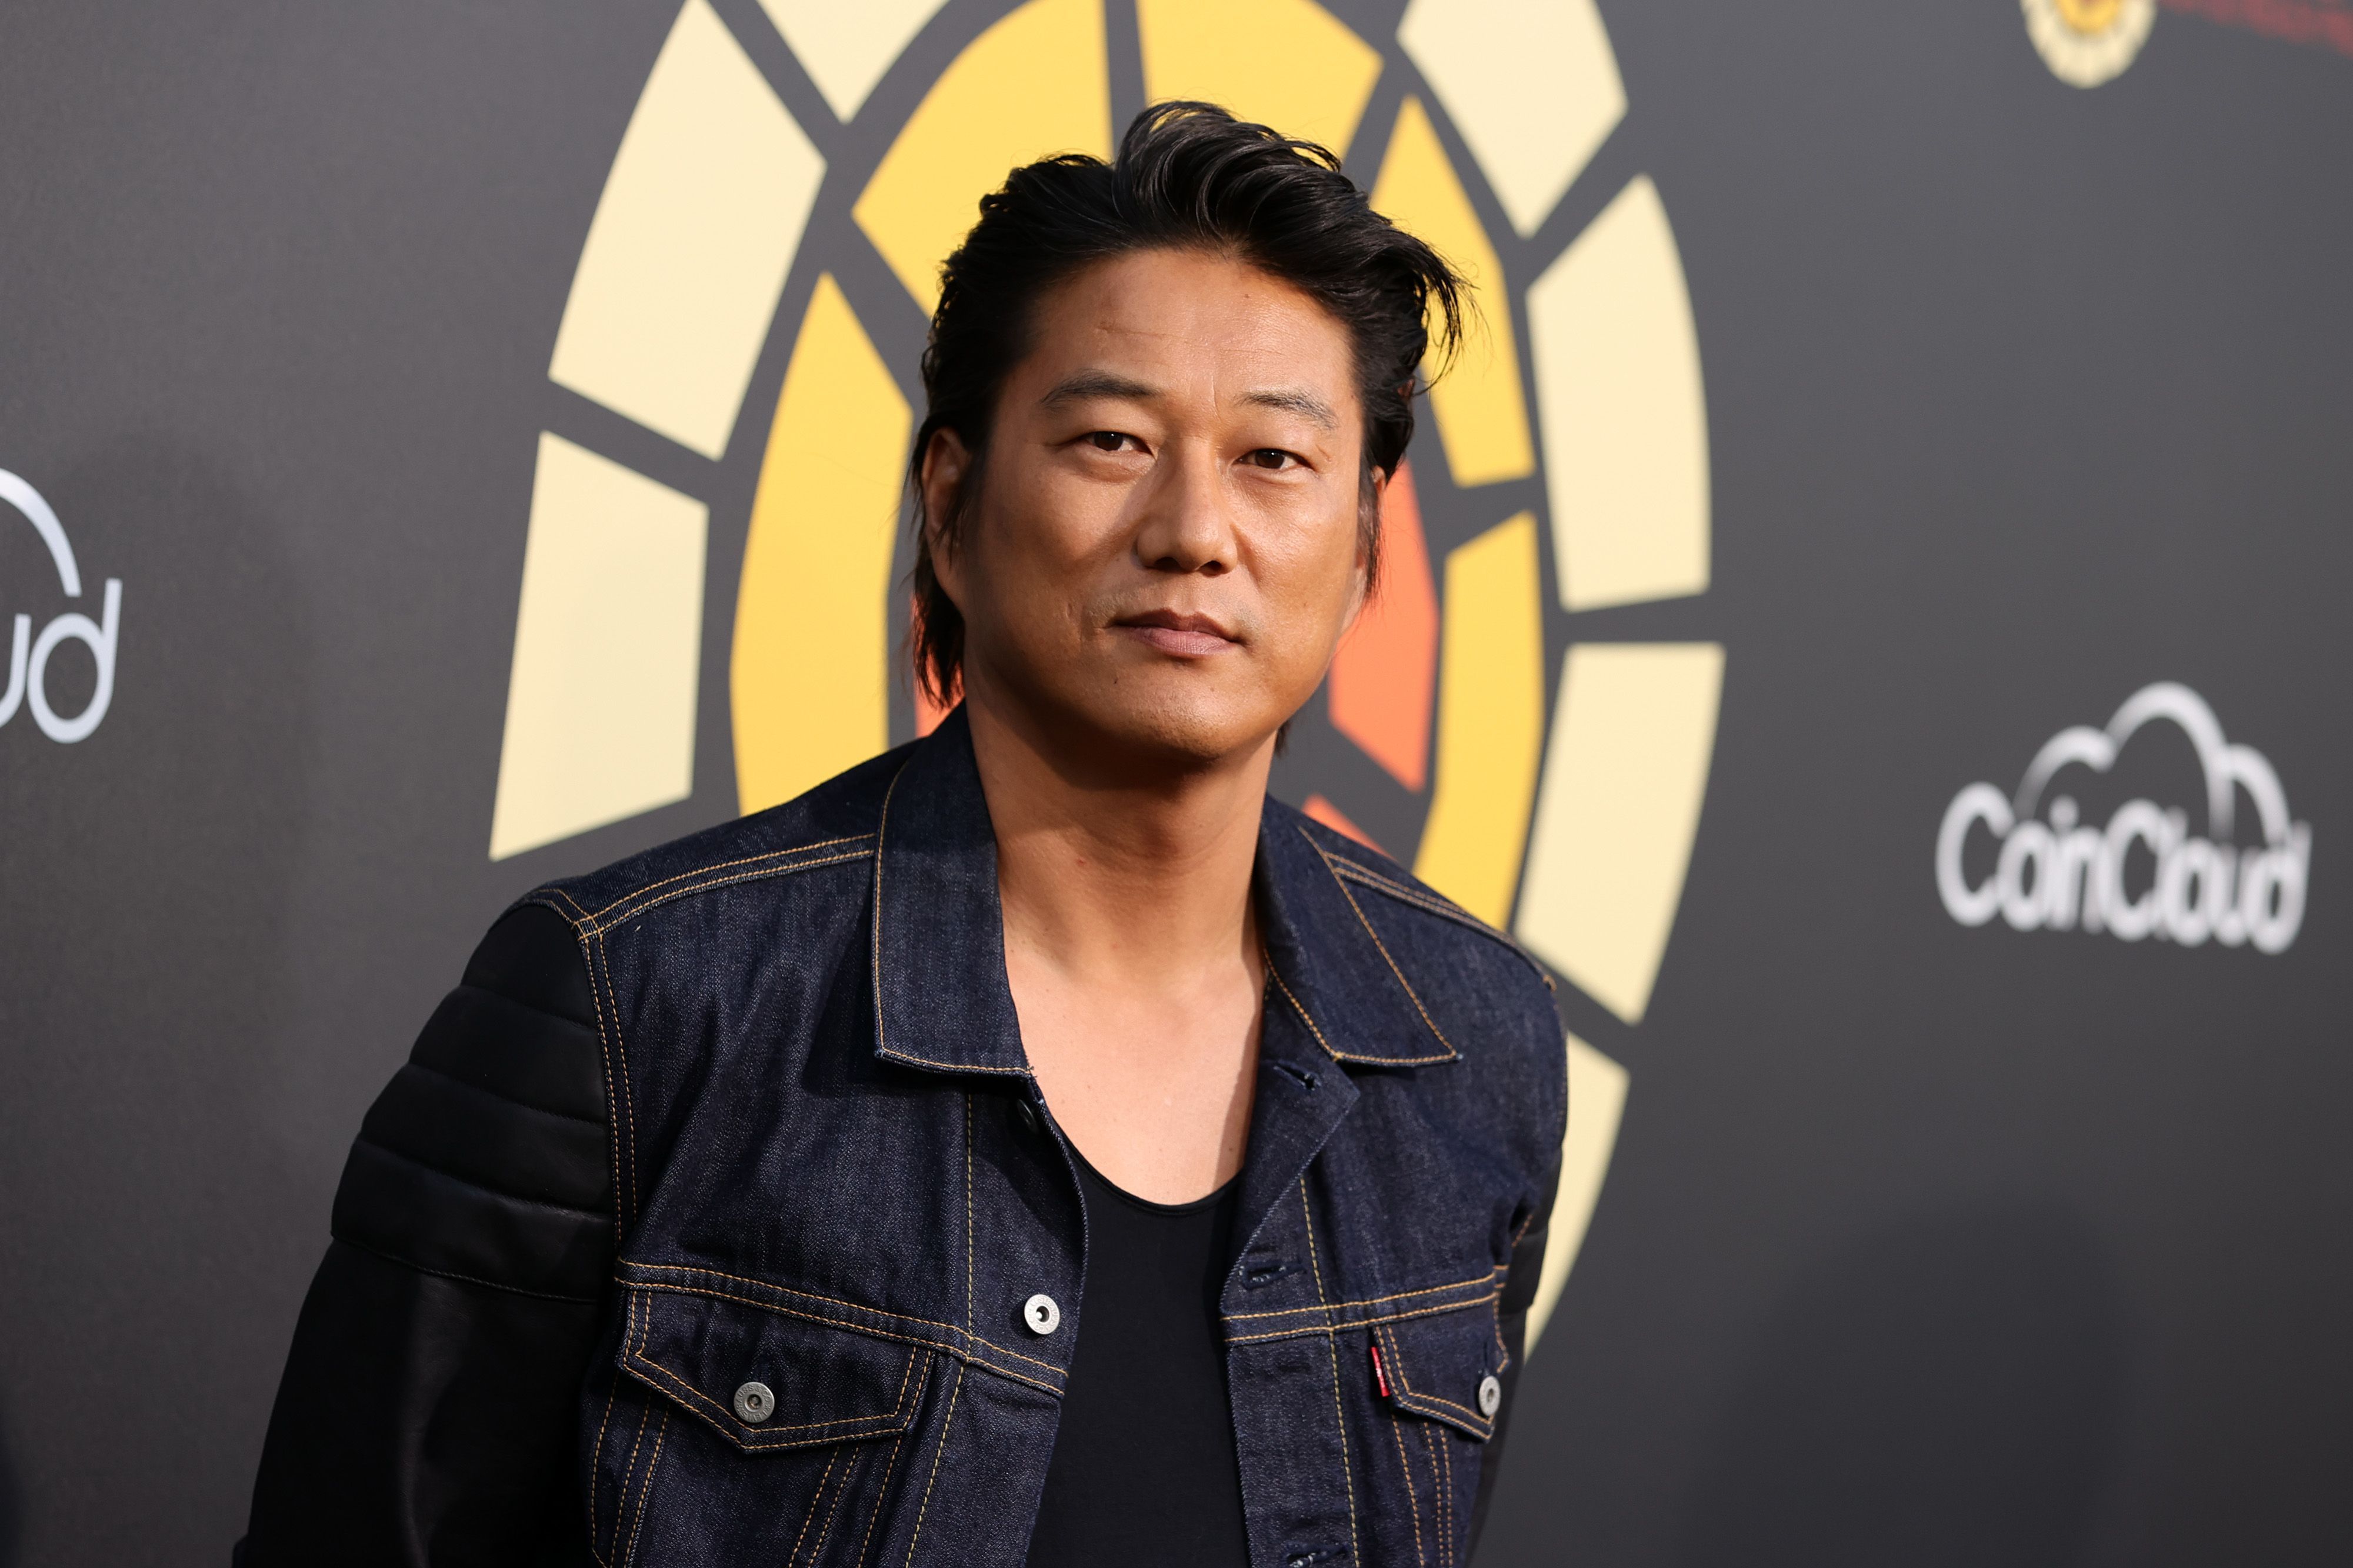 Here's What Sung Kang Thinks Fast Fans Should Campaign For